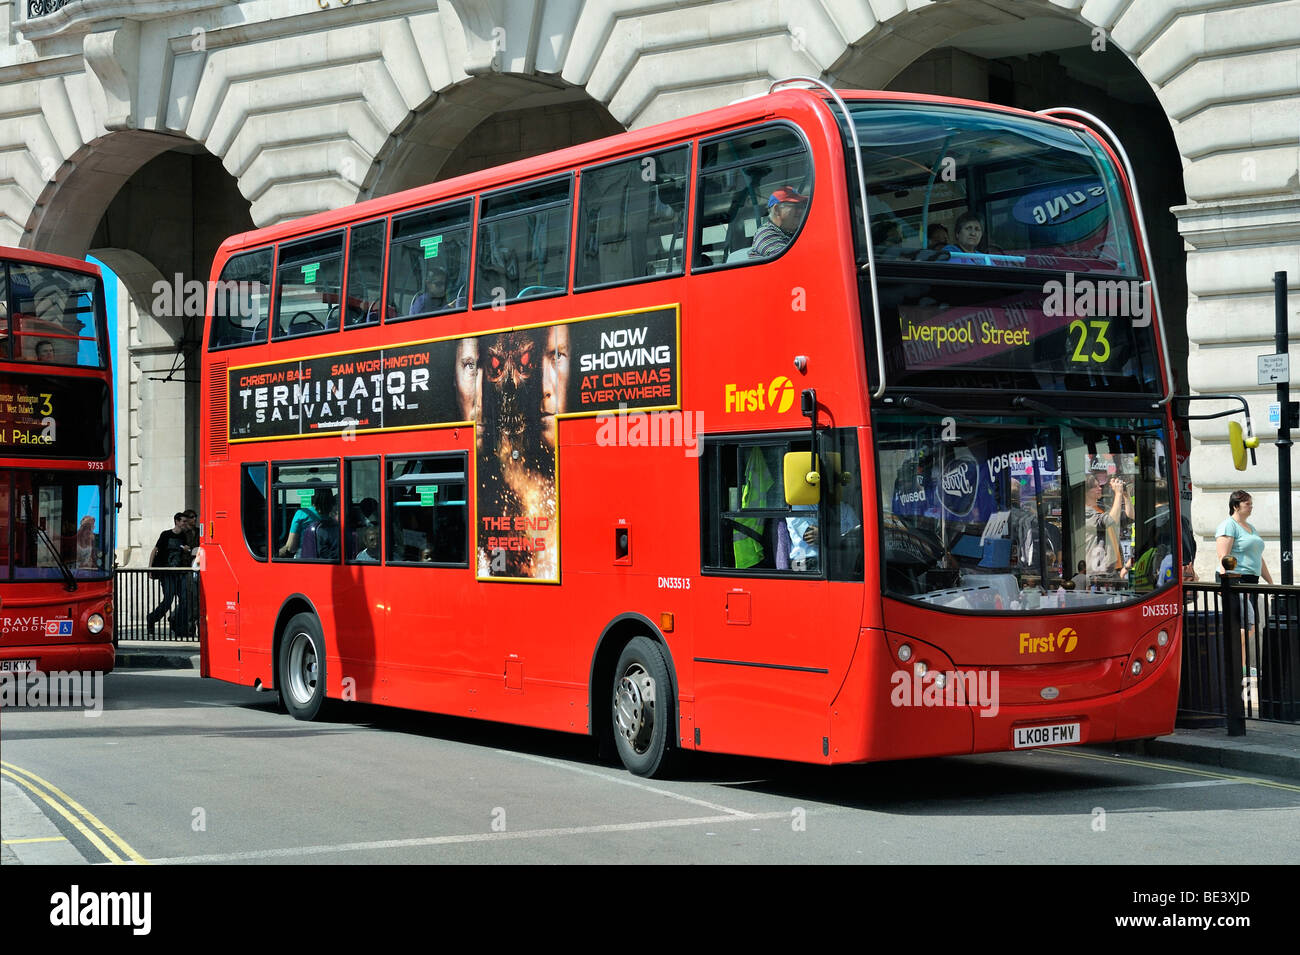 Modern double-decker bus, Routemaster, in London City, England, United Kingdom, Europe Stock Photo